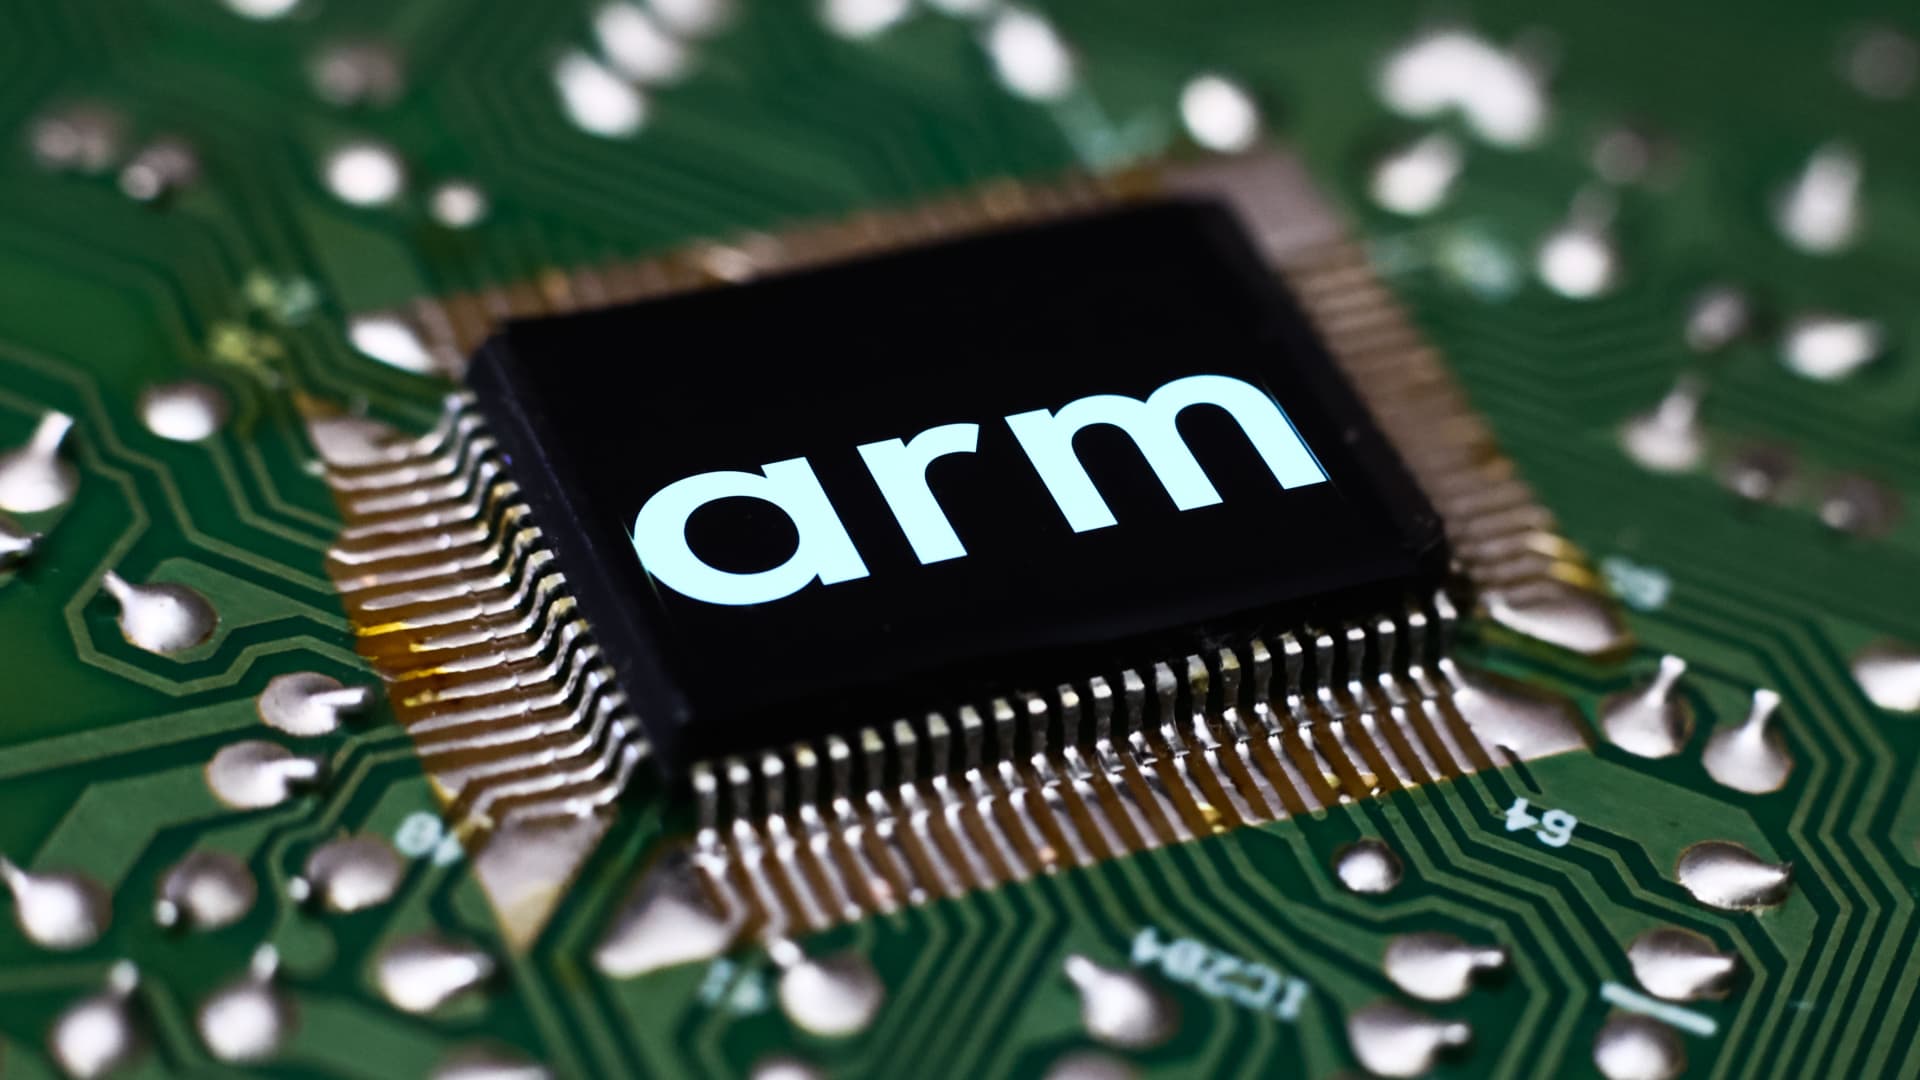 Chip designer Arm's shares plunge 8% after disappointing revenue guidance